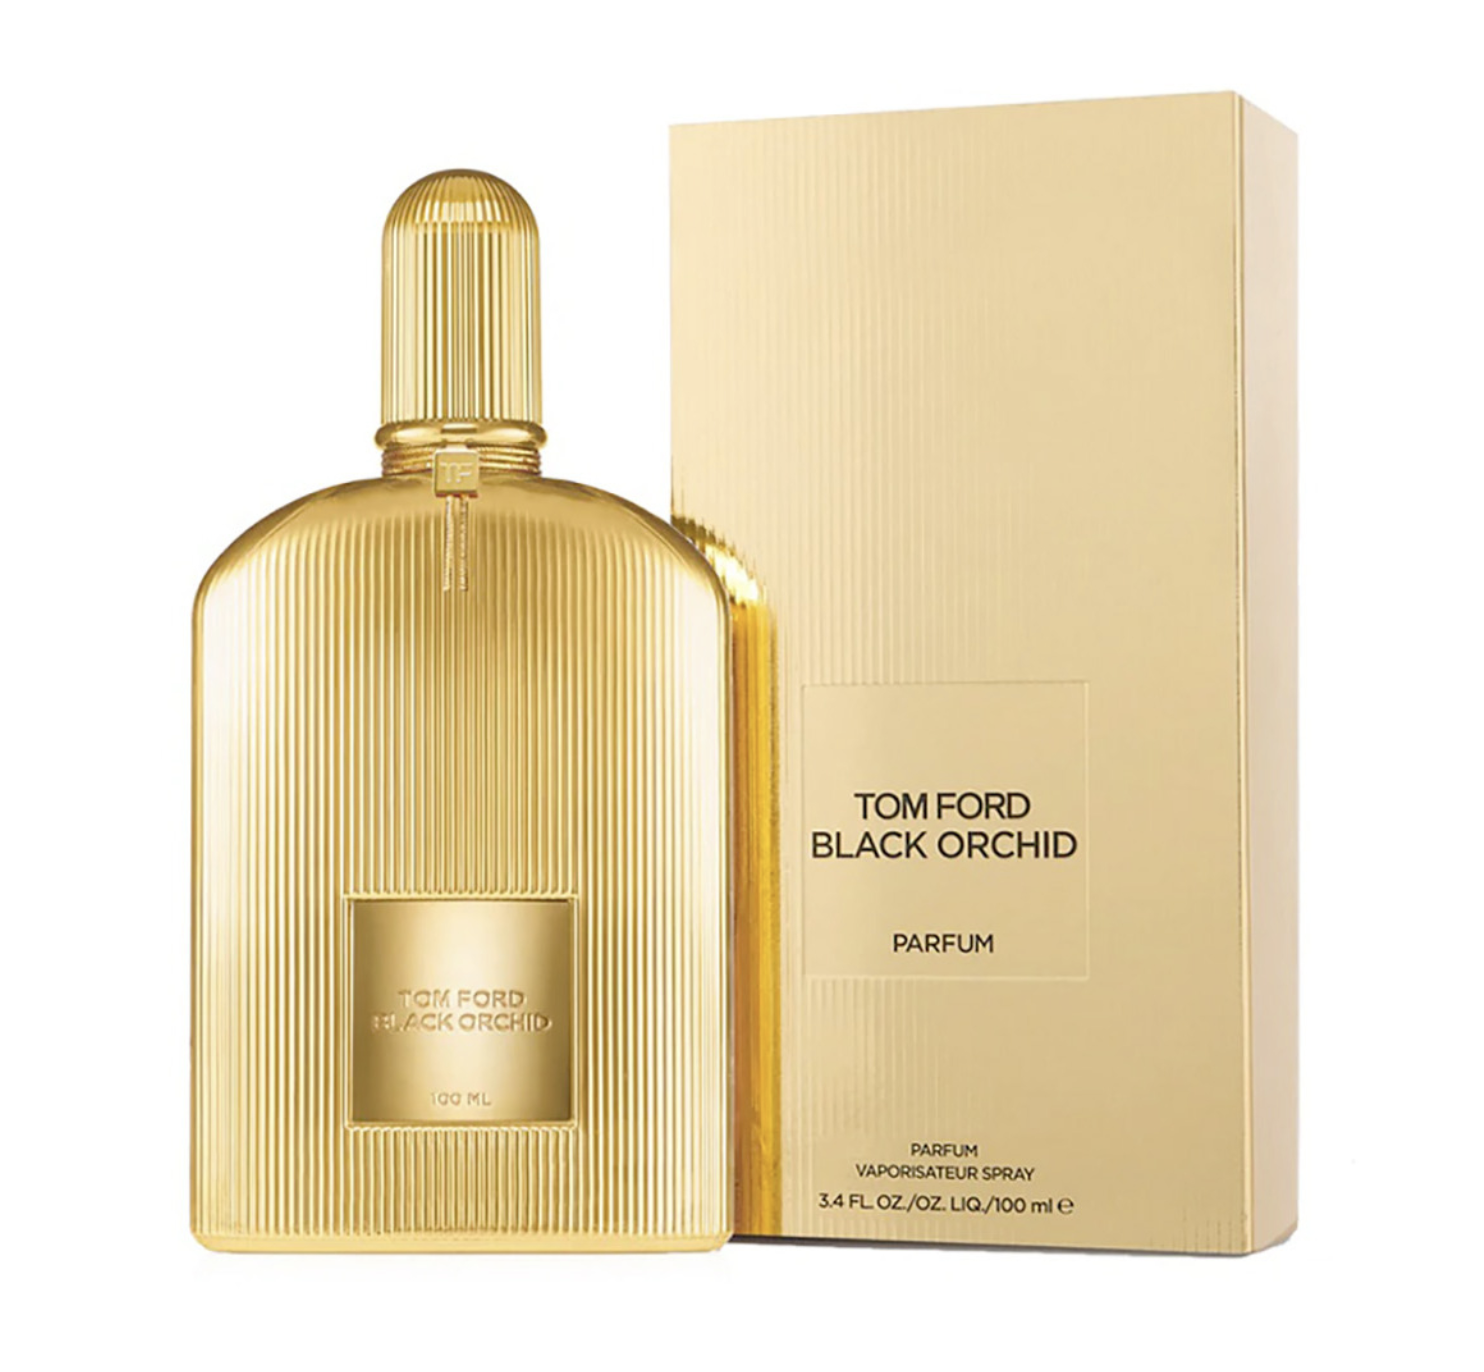 Tom Ford Black Orchid Parfum 100ml by Tom Ford - Escential Perfumes